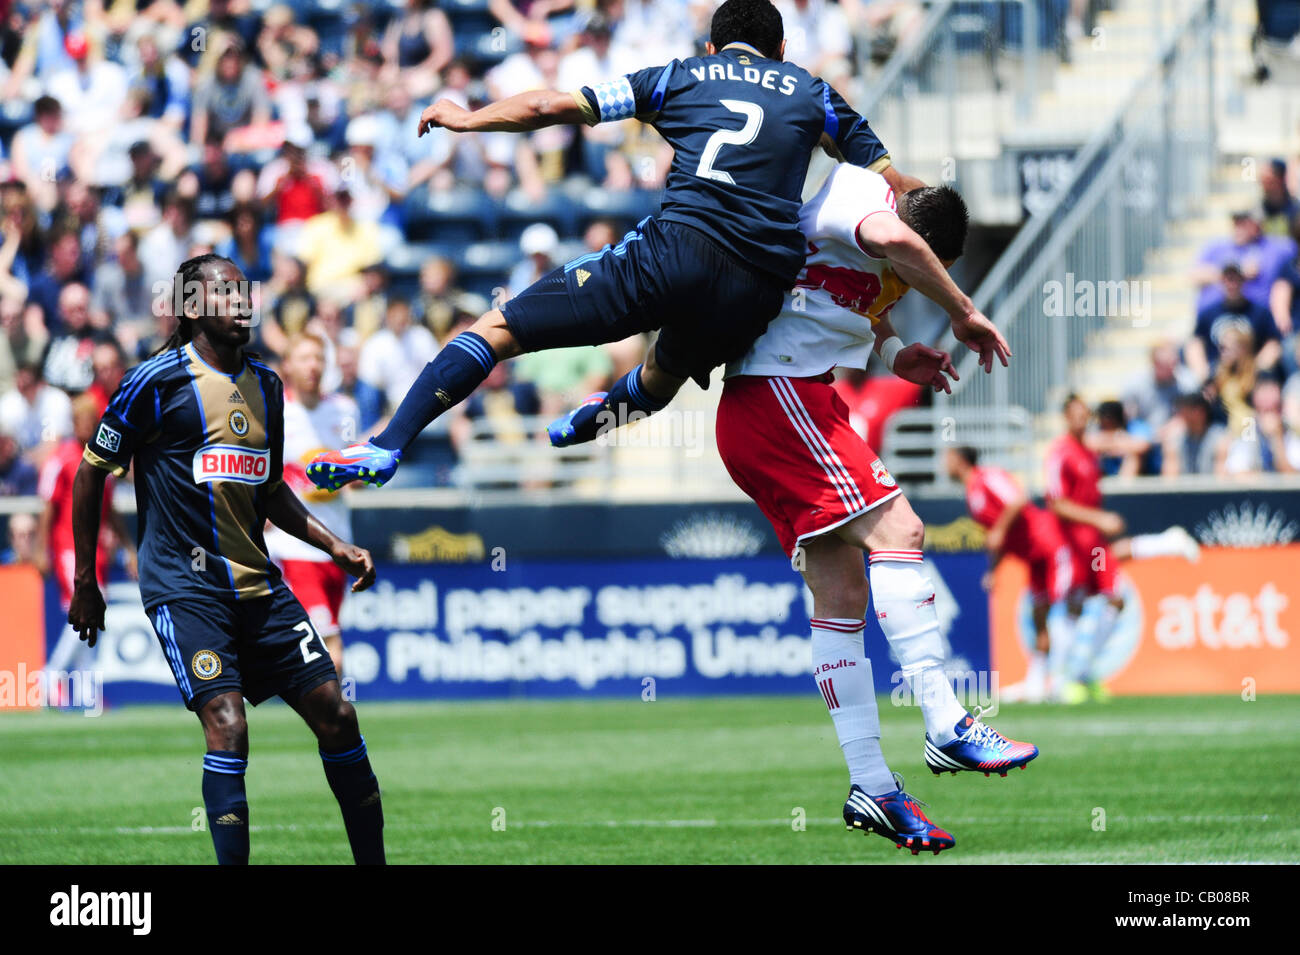 May 13, 2012 - Chester, Pennsylvania, U.S - Philadelphia Union's CARLOS VALDES in action against the Red Bulls at PPL Park. The Red Bulls won 3-2. (Credit Image: © Ricky Fitchett/ZUMAPRESS.com) Stock Photo